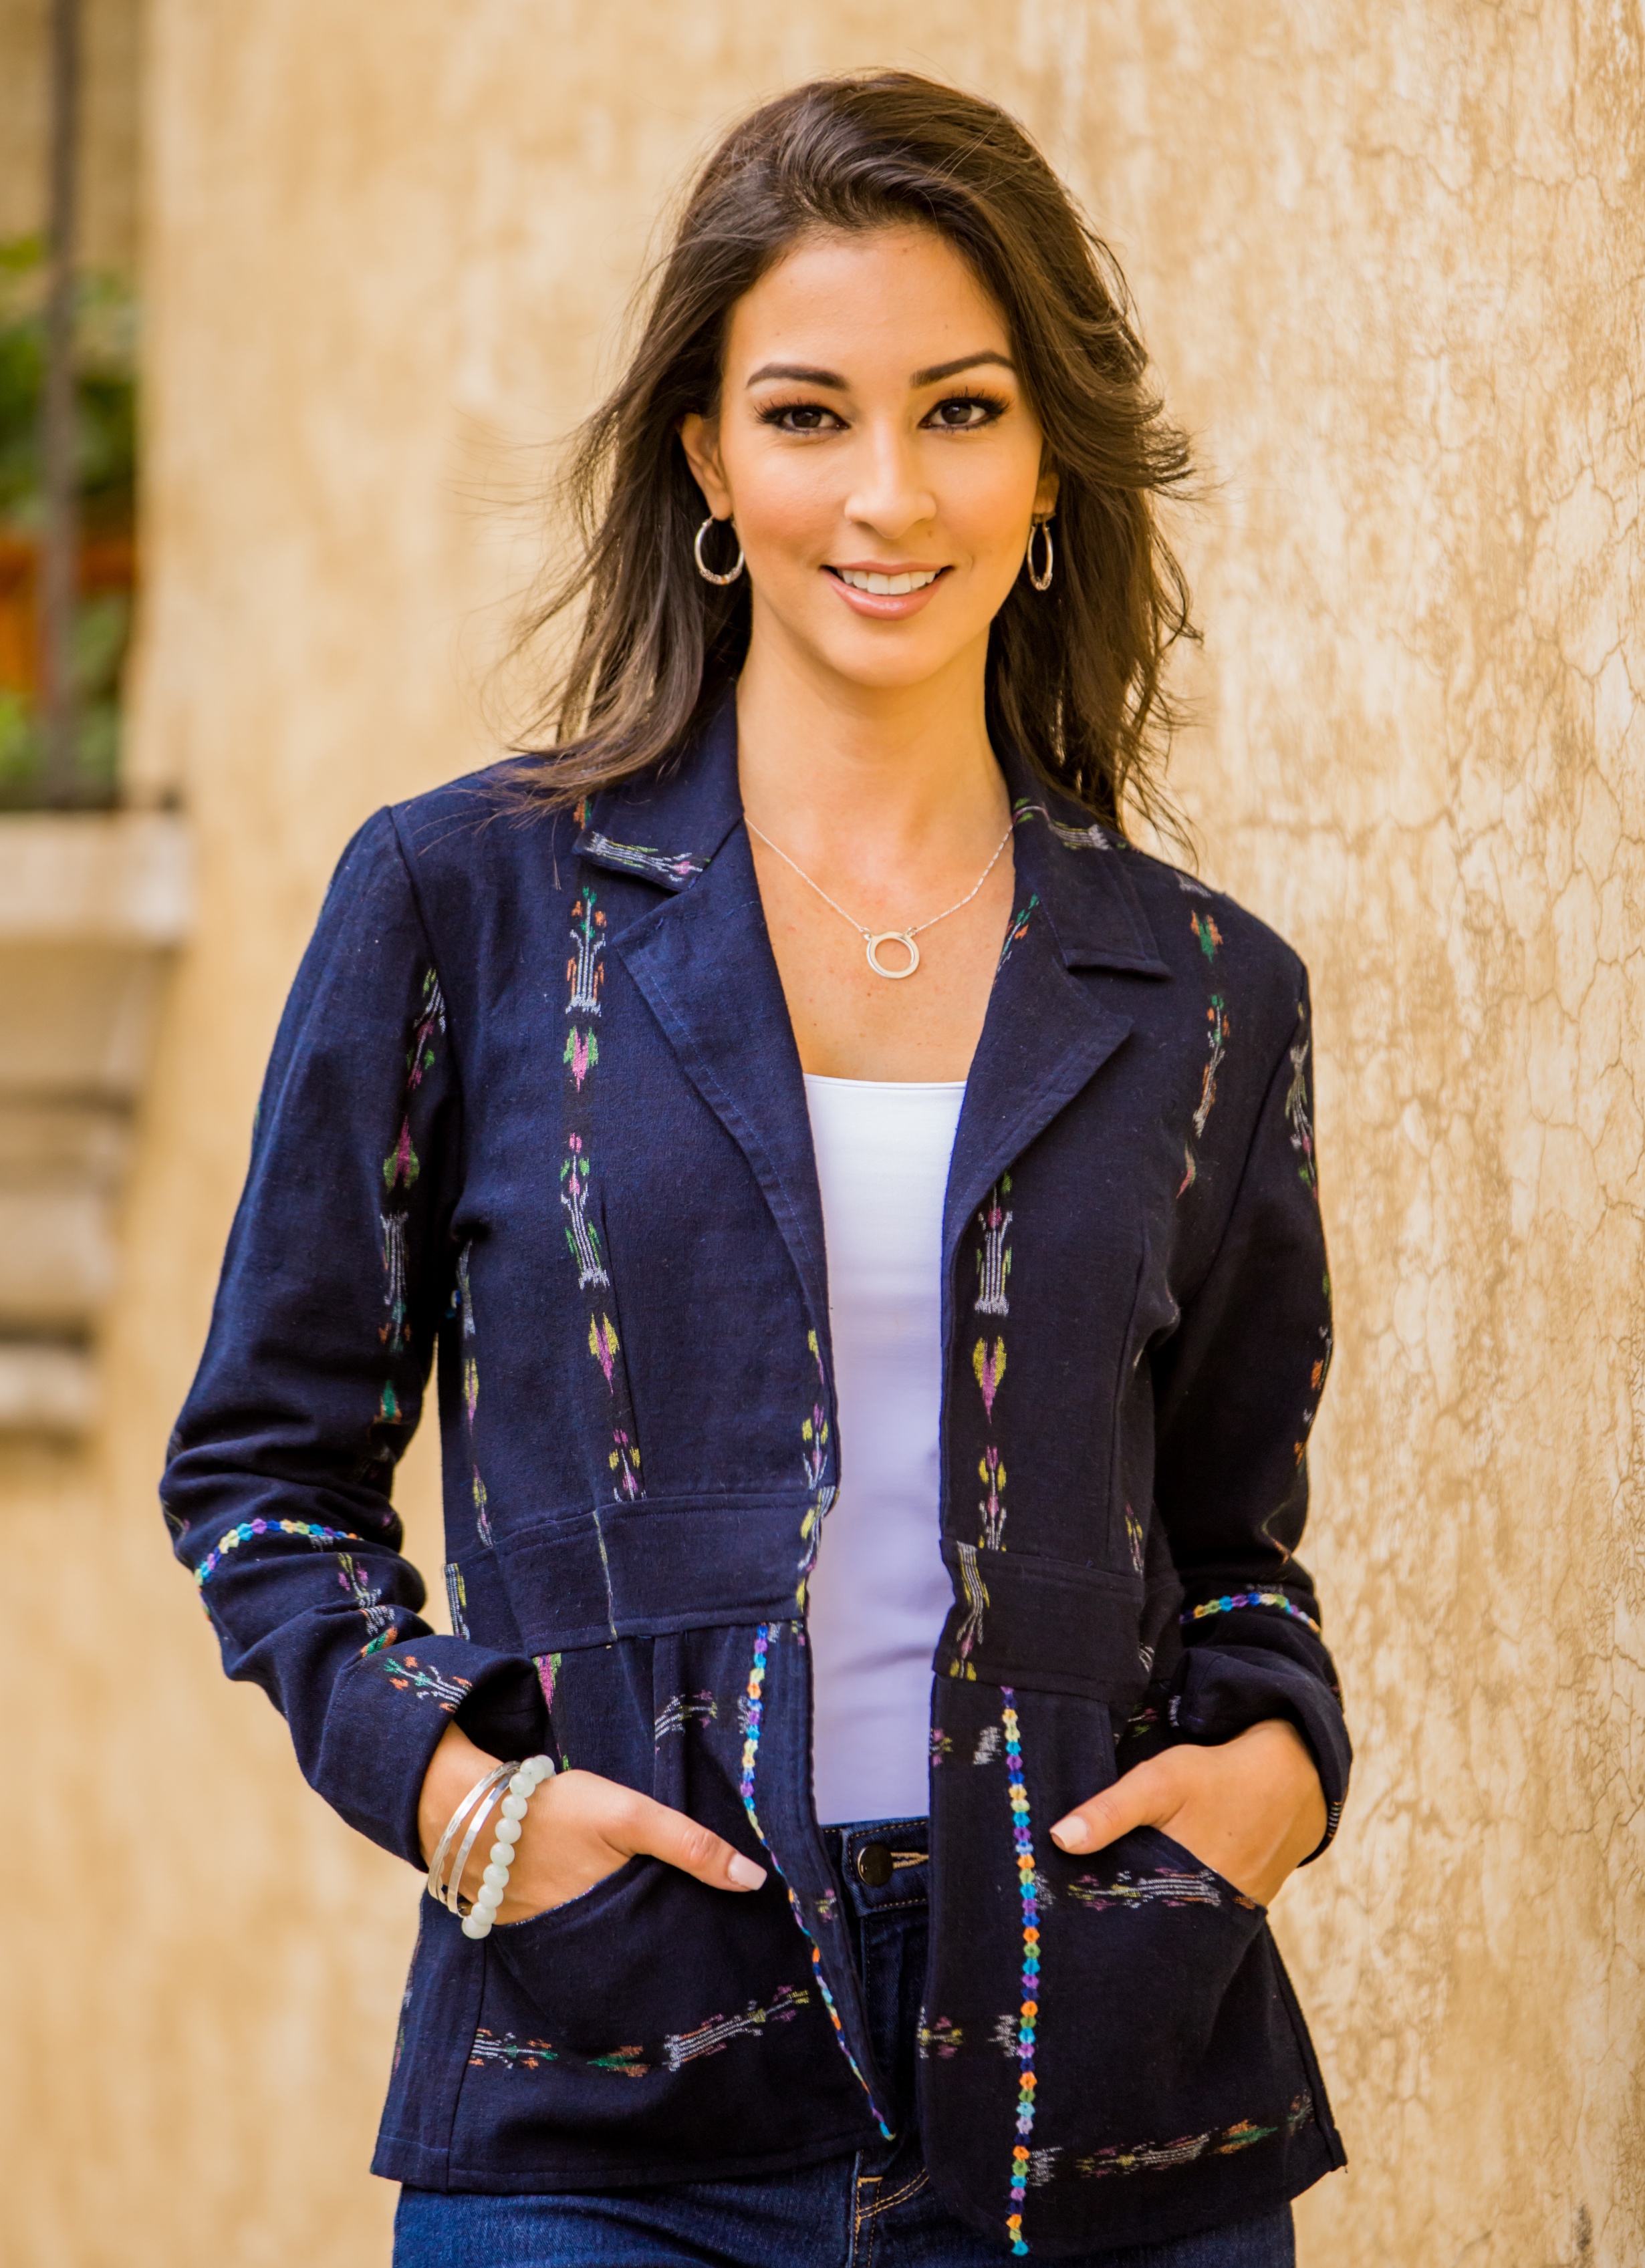 Mountain Fashion Woven Blue Cotton Blazer with Multicolor Accents Revamp your wardrobe